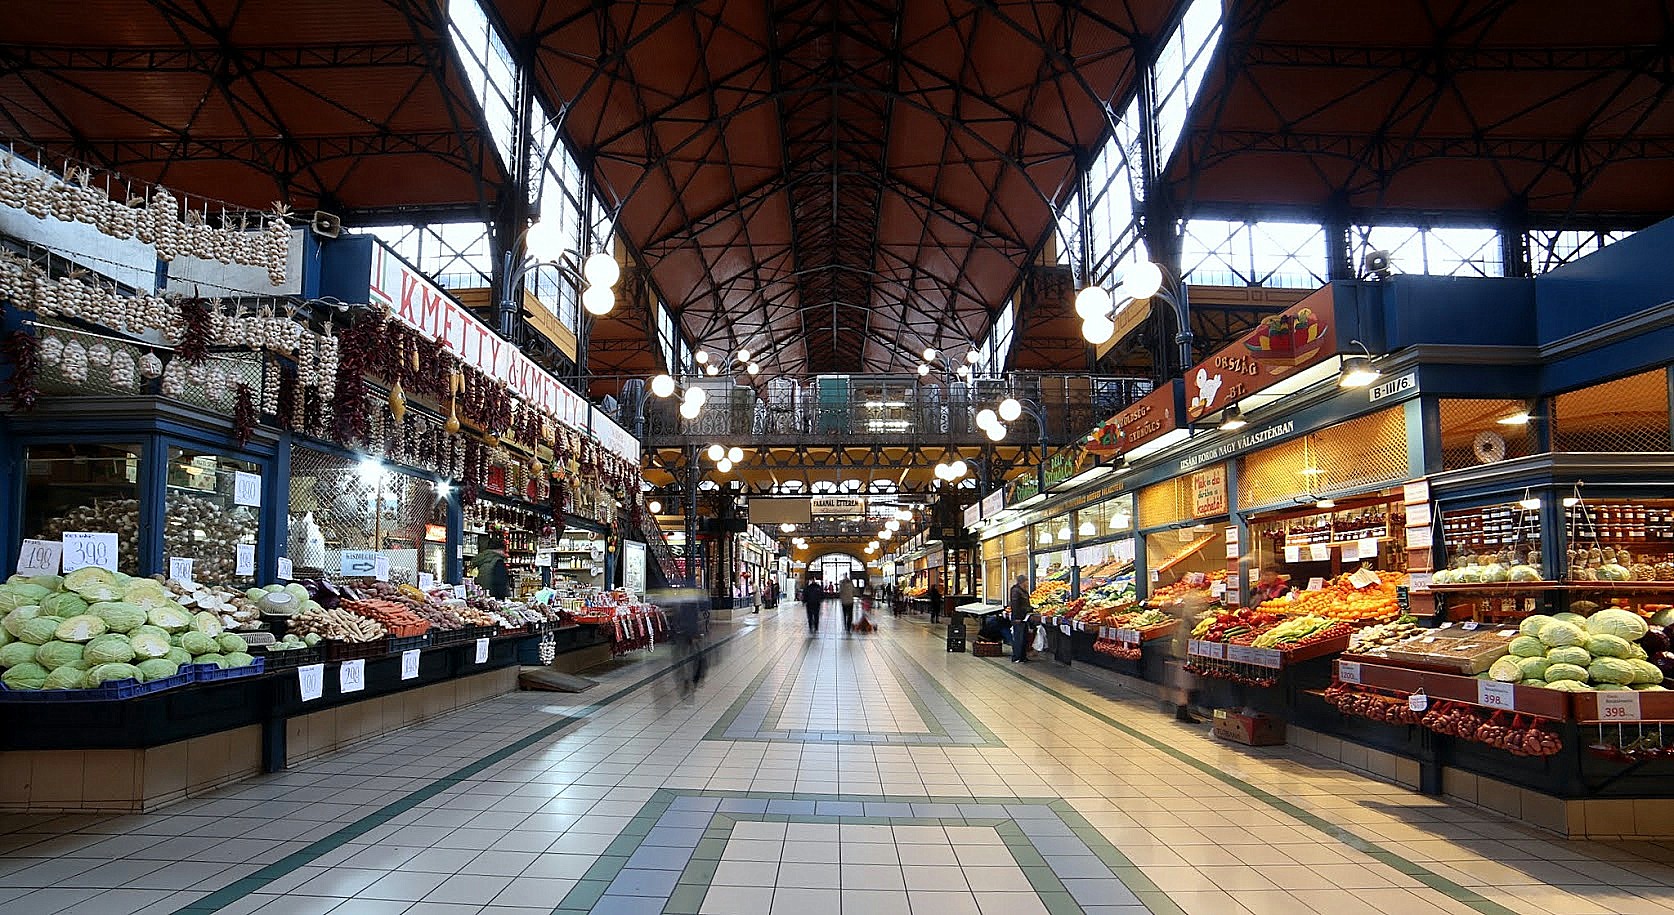 The main floor of the Central Market Hall in Budapest, Hungary